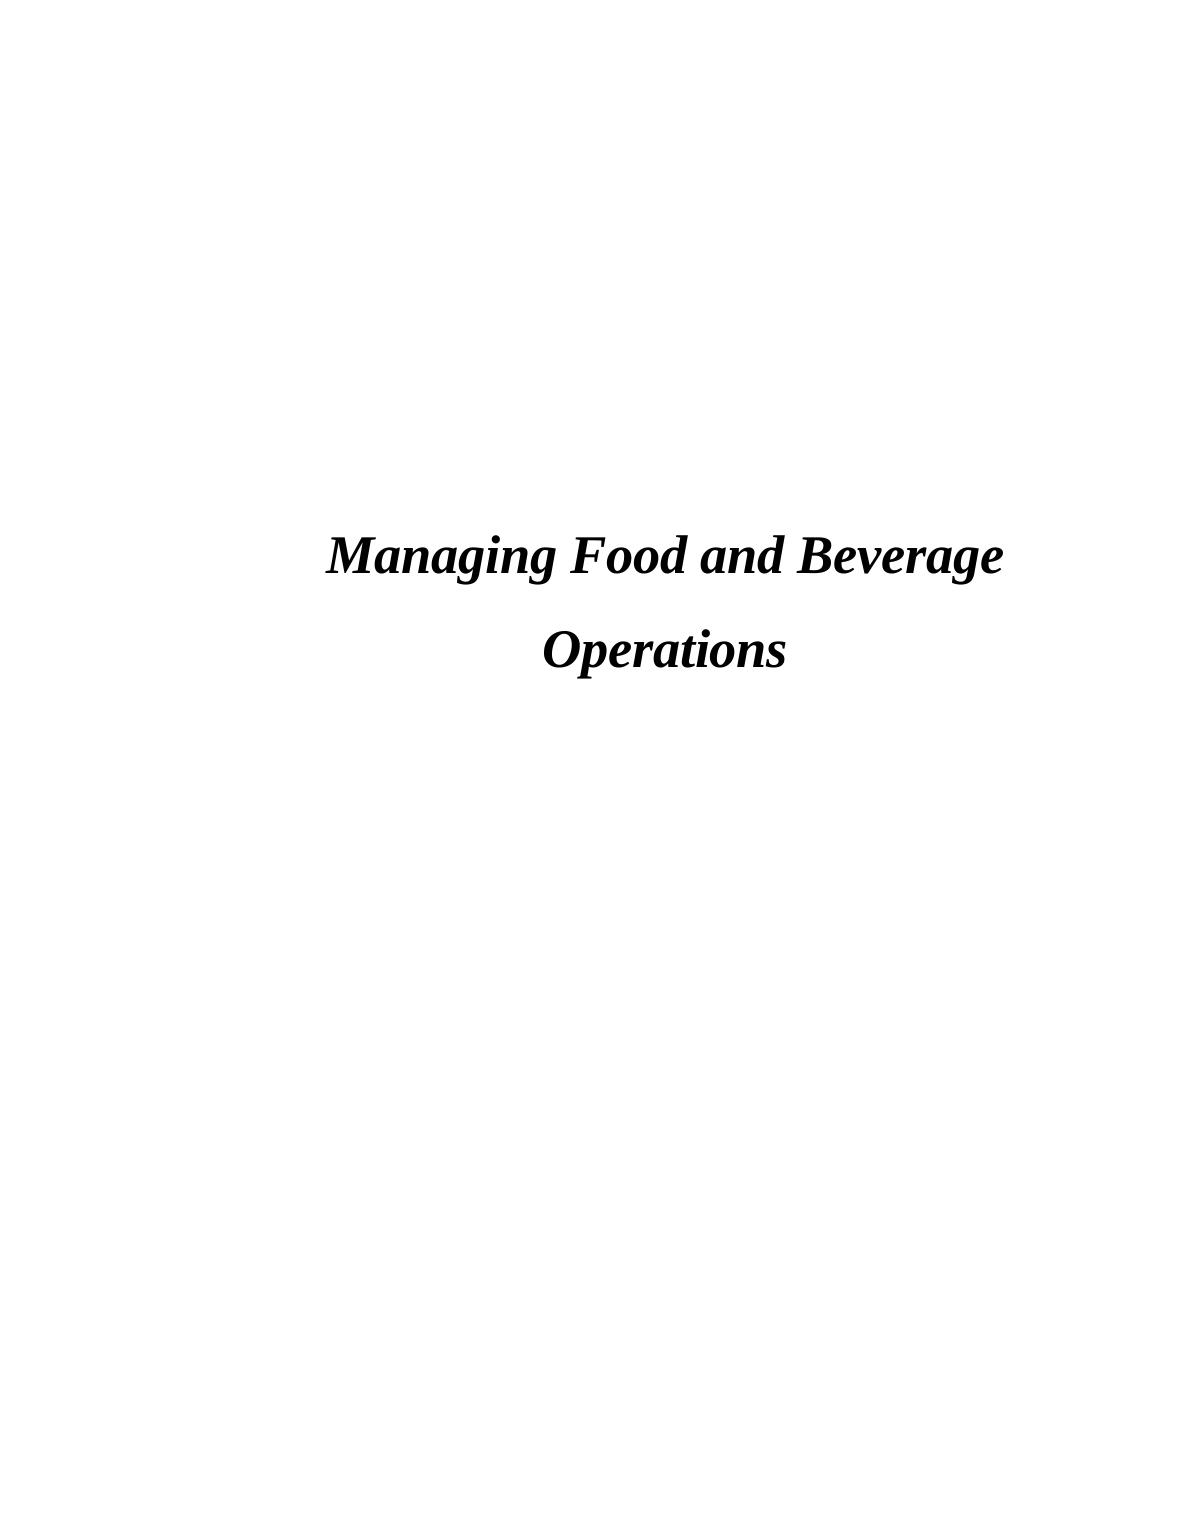 Managing Food and Beverage Operations - pdf_1